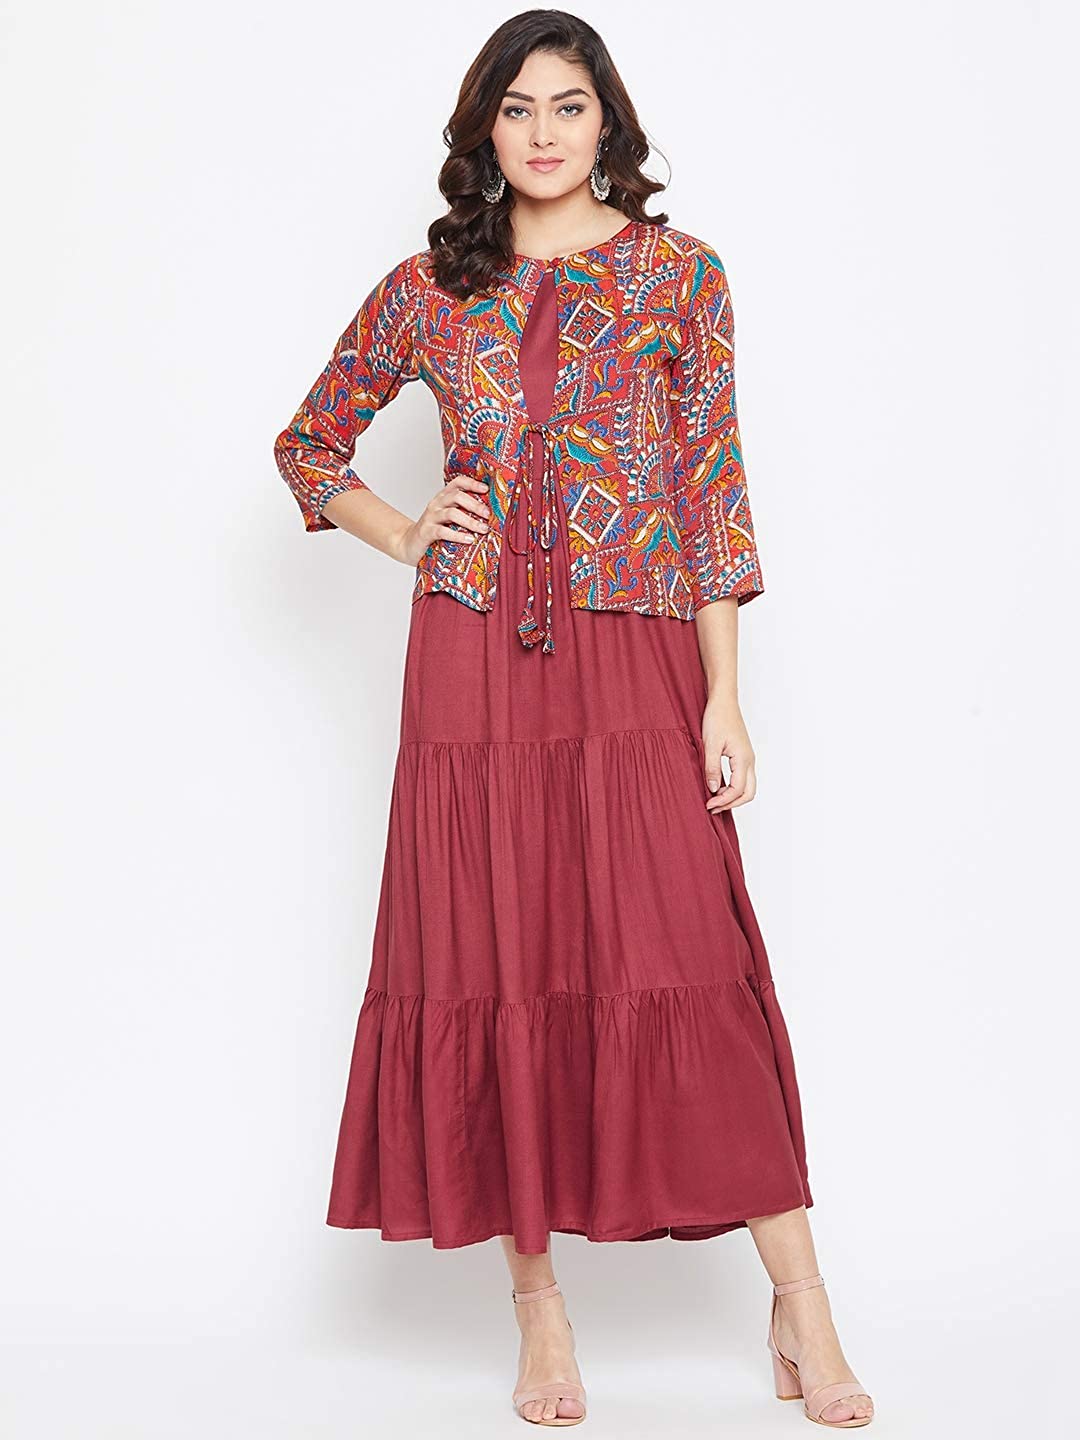 HELLO DESIGN Women's Rayon 3/4 Sleeve Flared Full-Length Maxi Dress -  DRESSES in Sri Lanka from Arcade Online Shopping - Just Rs. 6299!